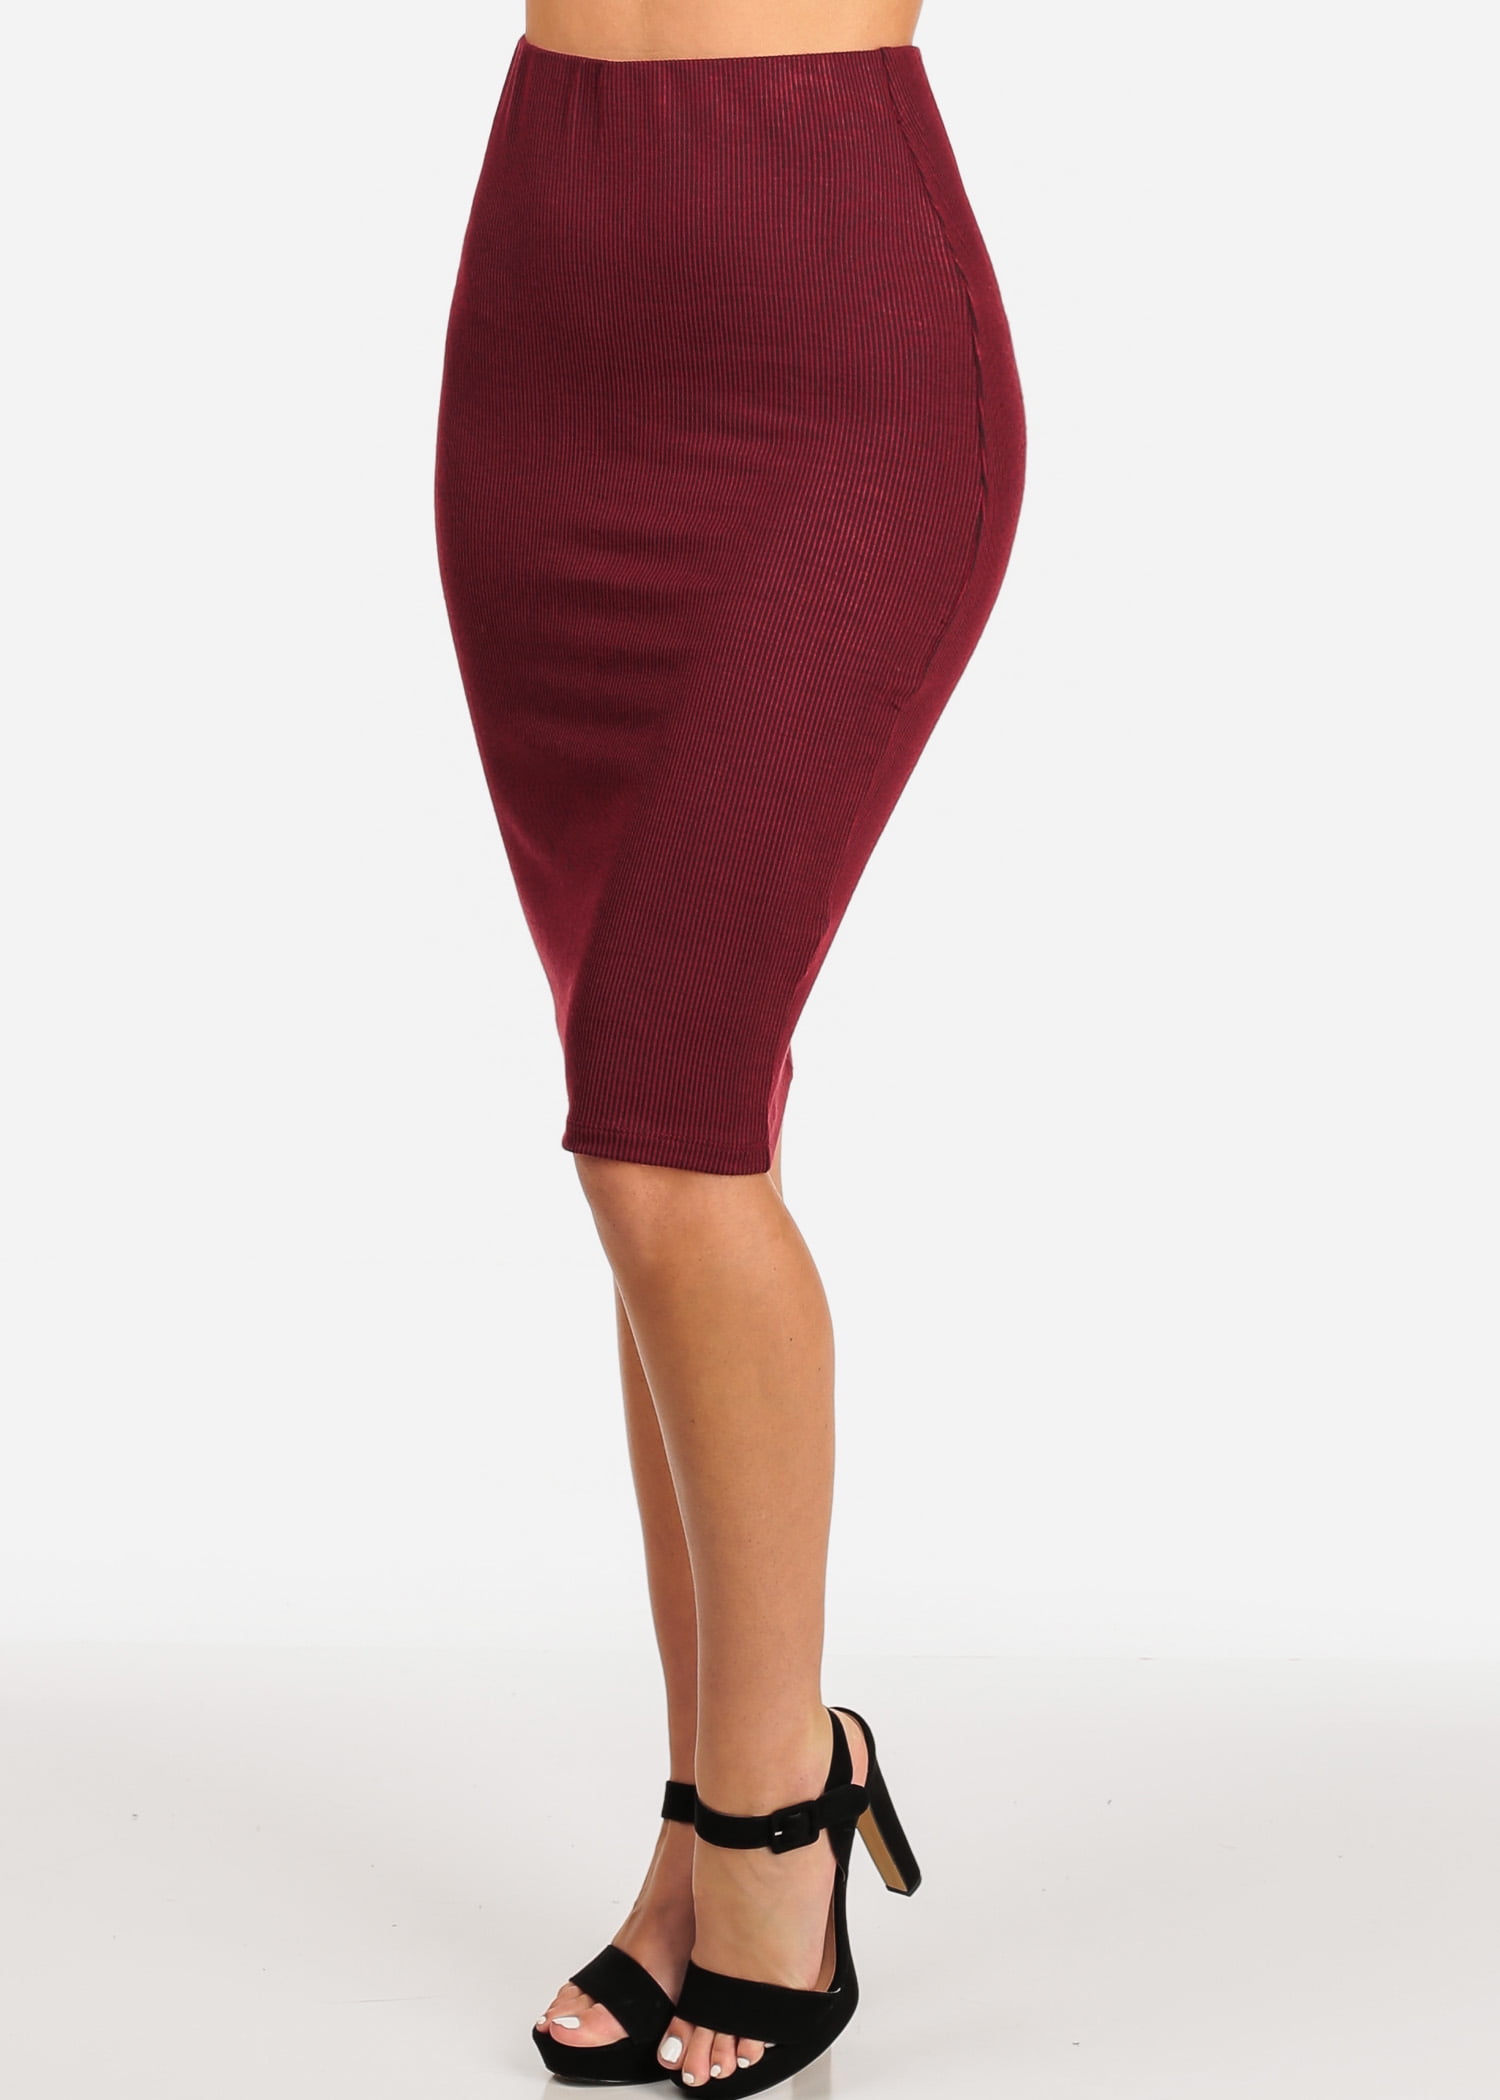 Modaxpressonline Womens Pencil Skirt Professional Business Office Career Wear Sexy Pencil Pull